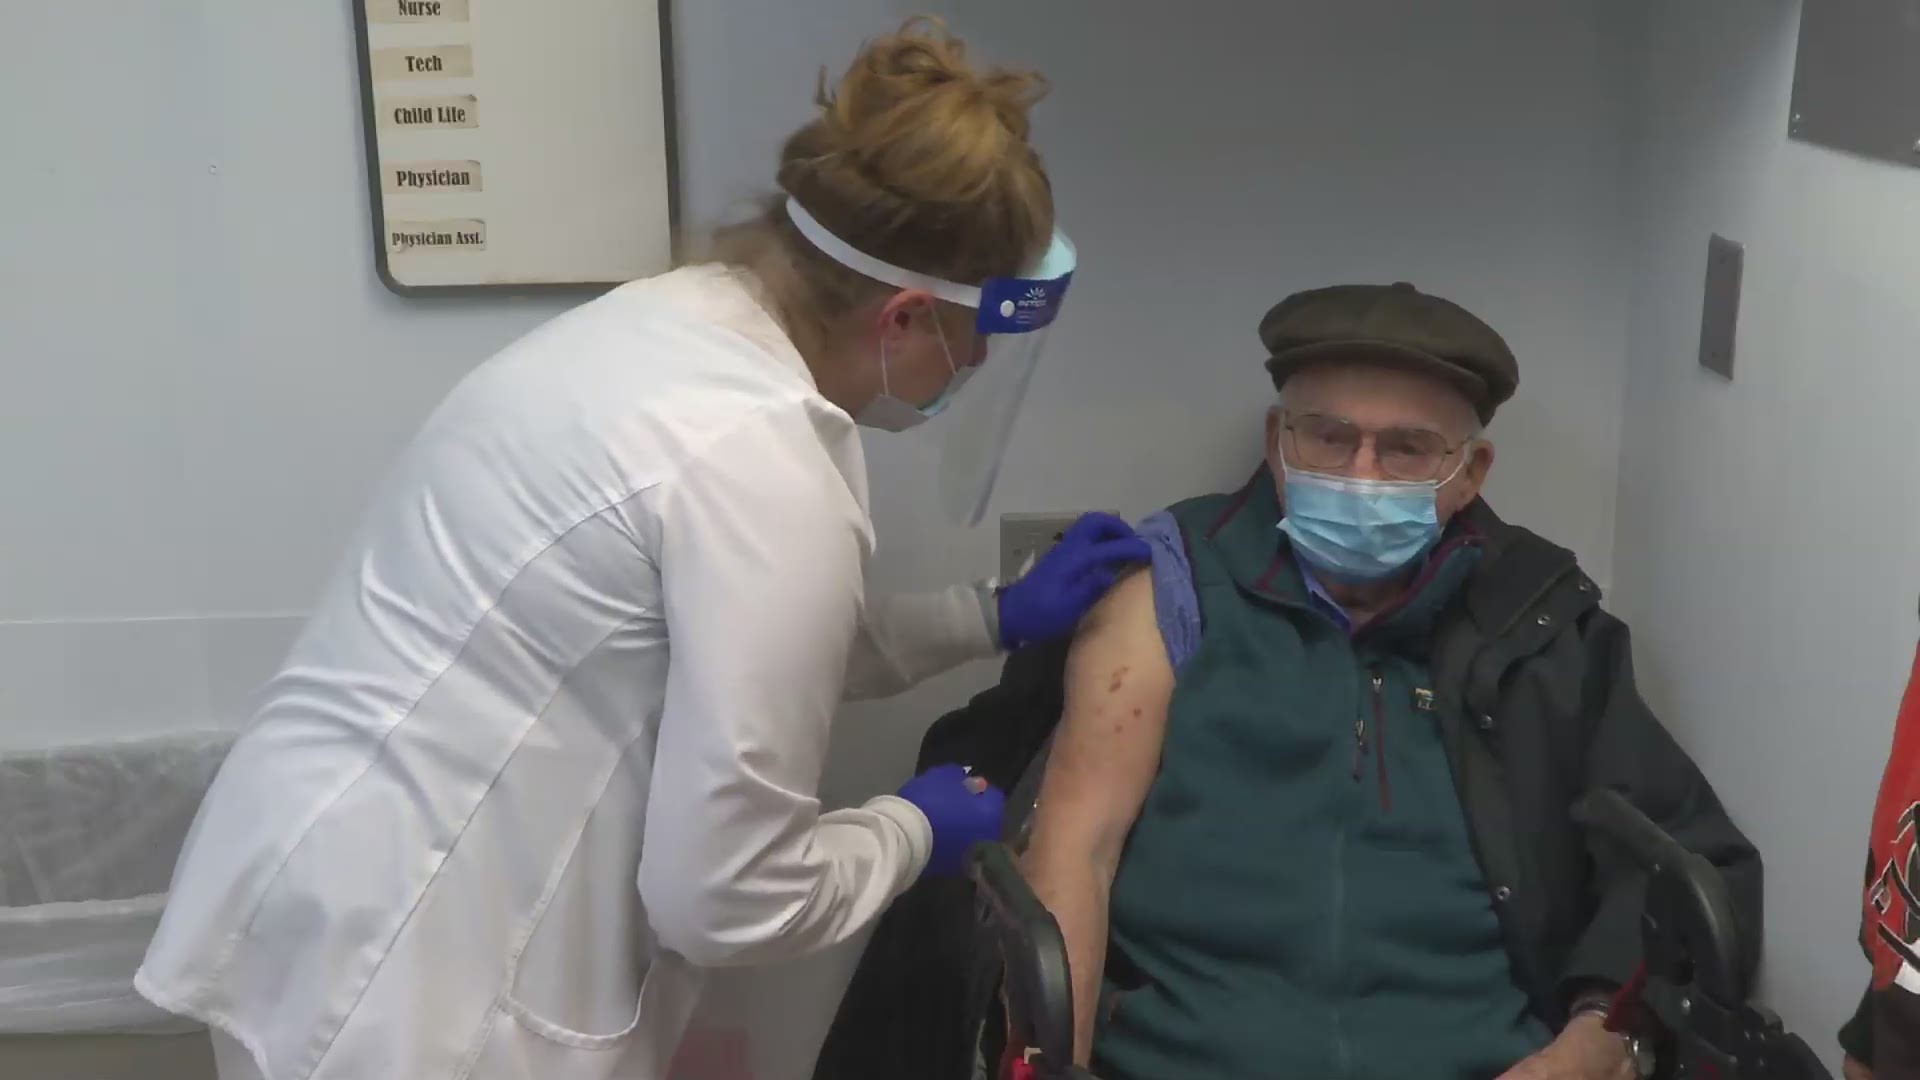 On Tuesday, the Cleveland Clinic started vaccinating the oldest, most vulnerable patients aged 80 and older.  The death toll in the U.S. topped 400,000 today.